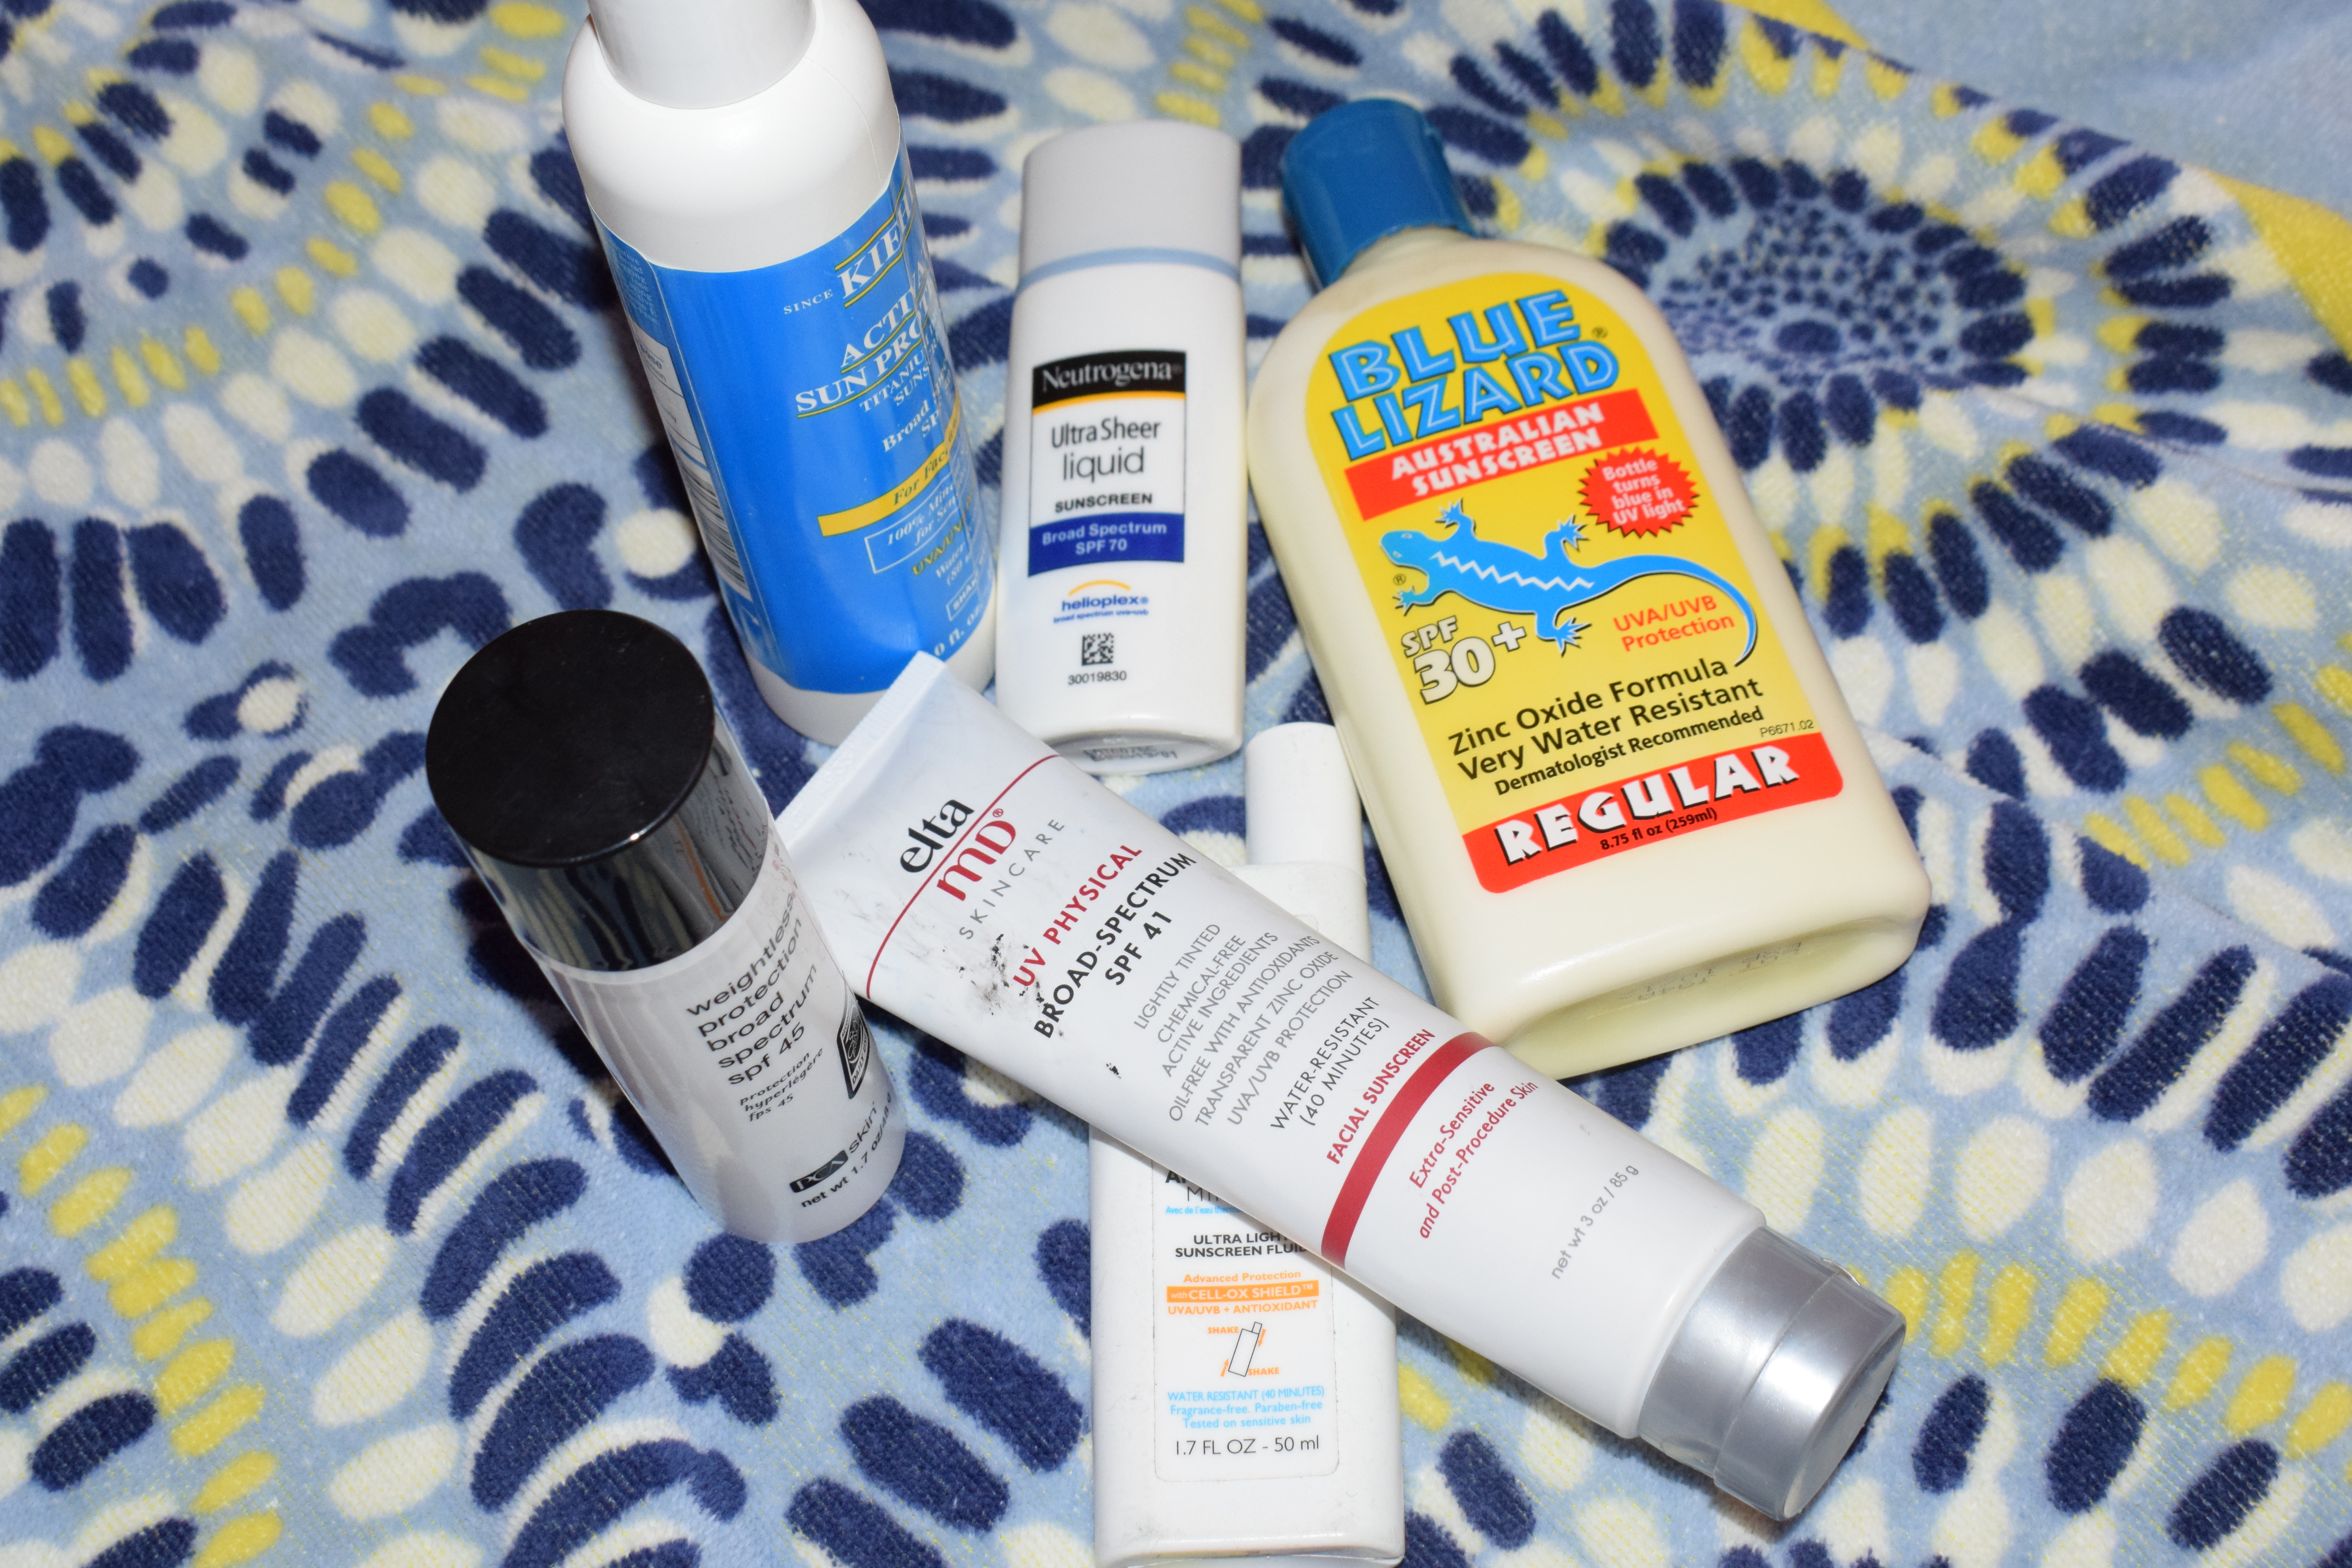 My Sunscreen Recommendations